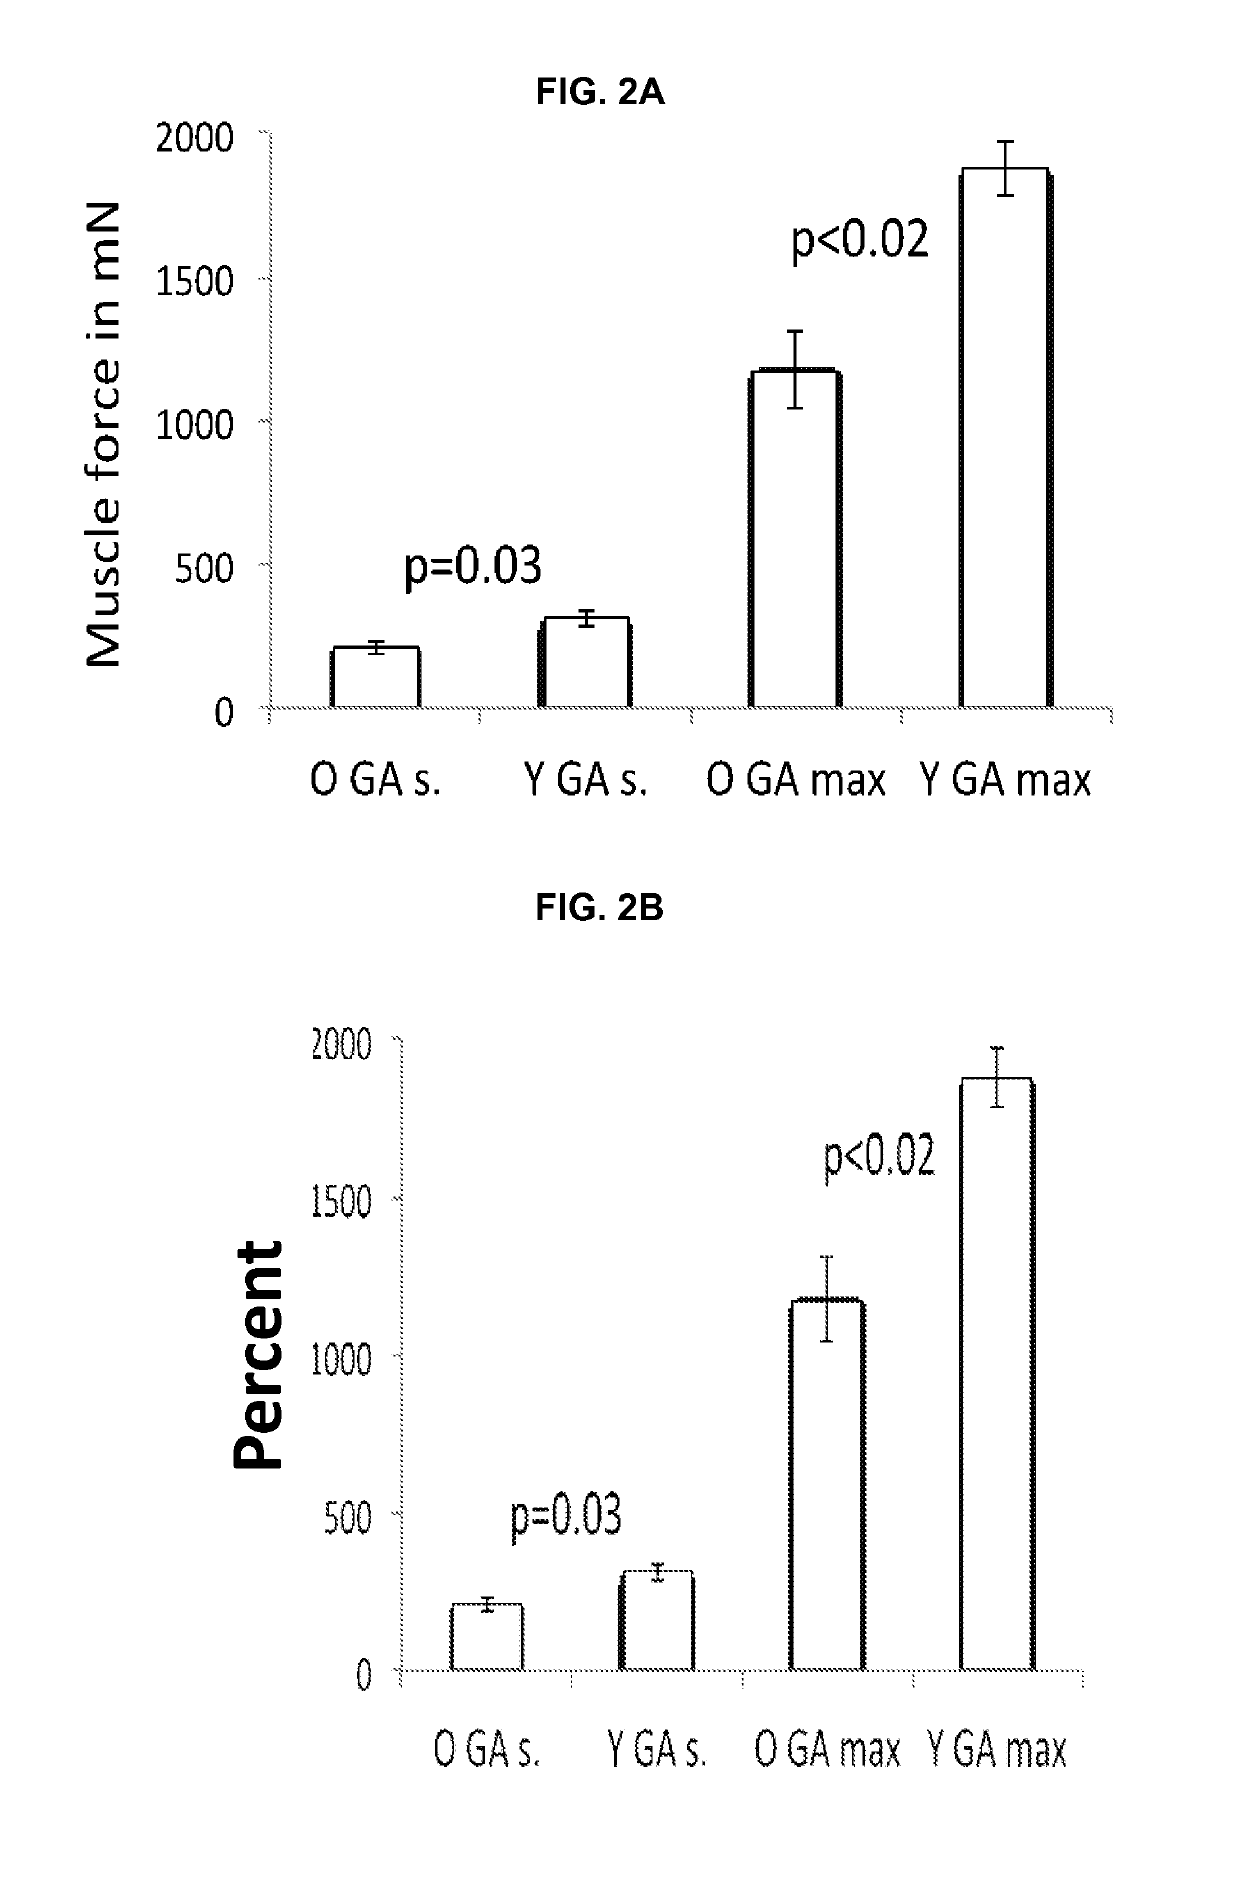 Molecular composition for enhancing and rejuvenating maintenance and repair of mammalian tissues